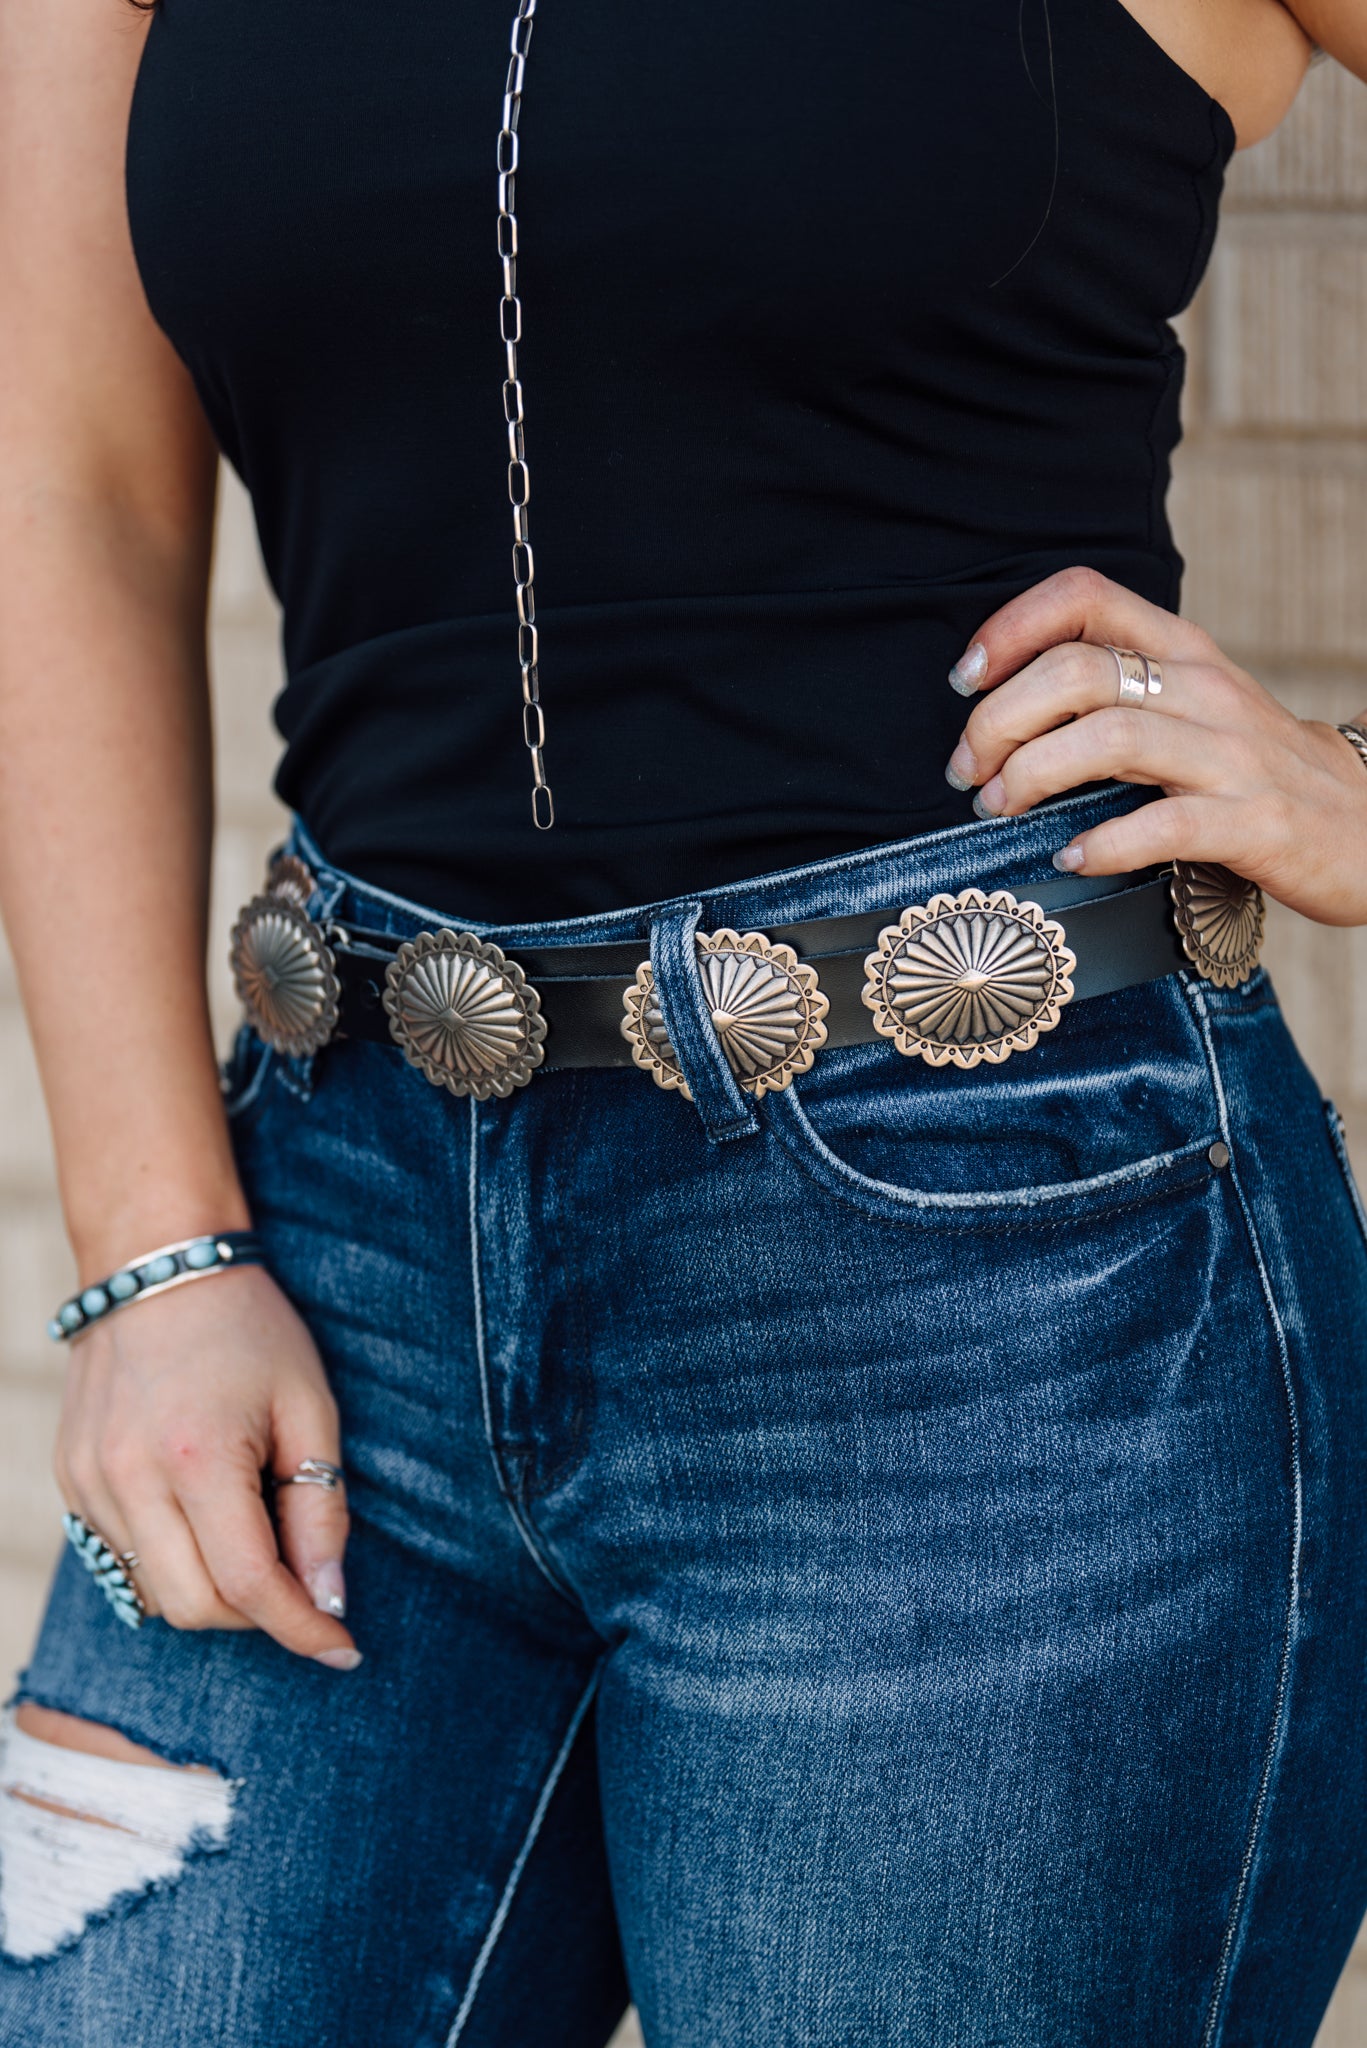 The Stemmons Concho Belt